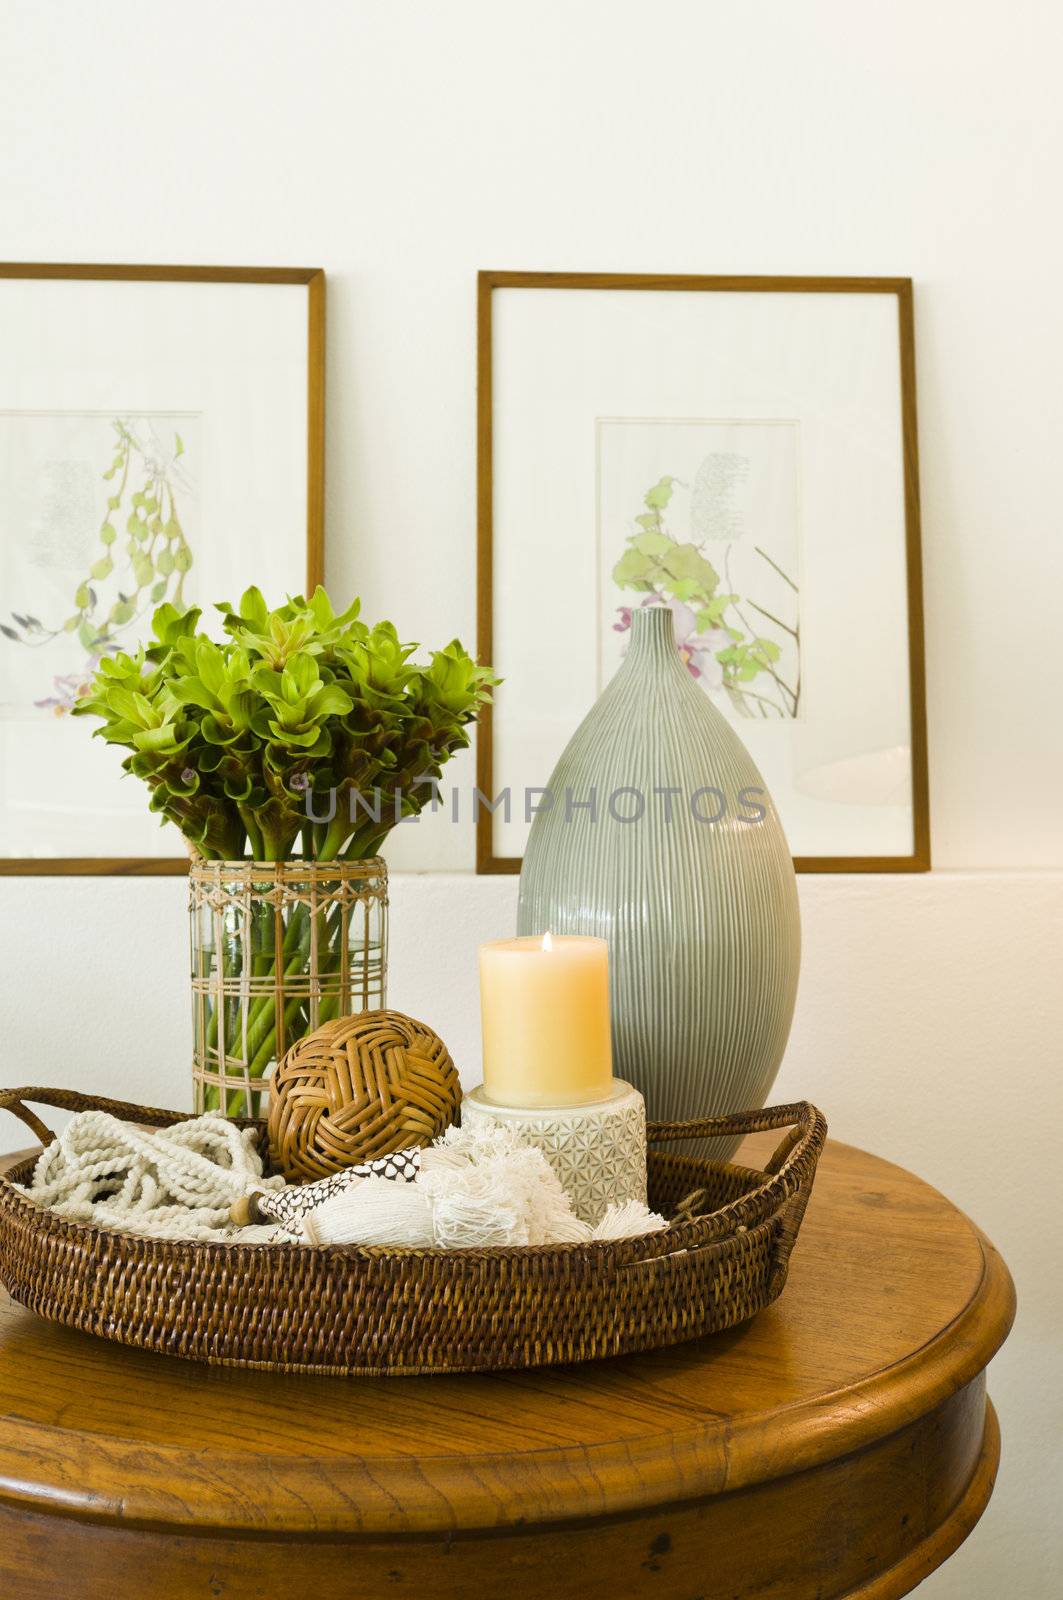 Flower vase in beautiful interior design decoration and wall pictures